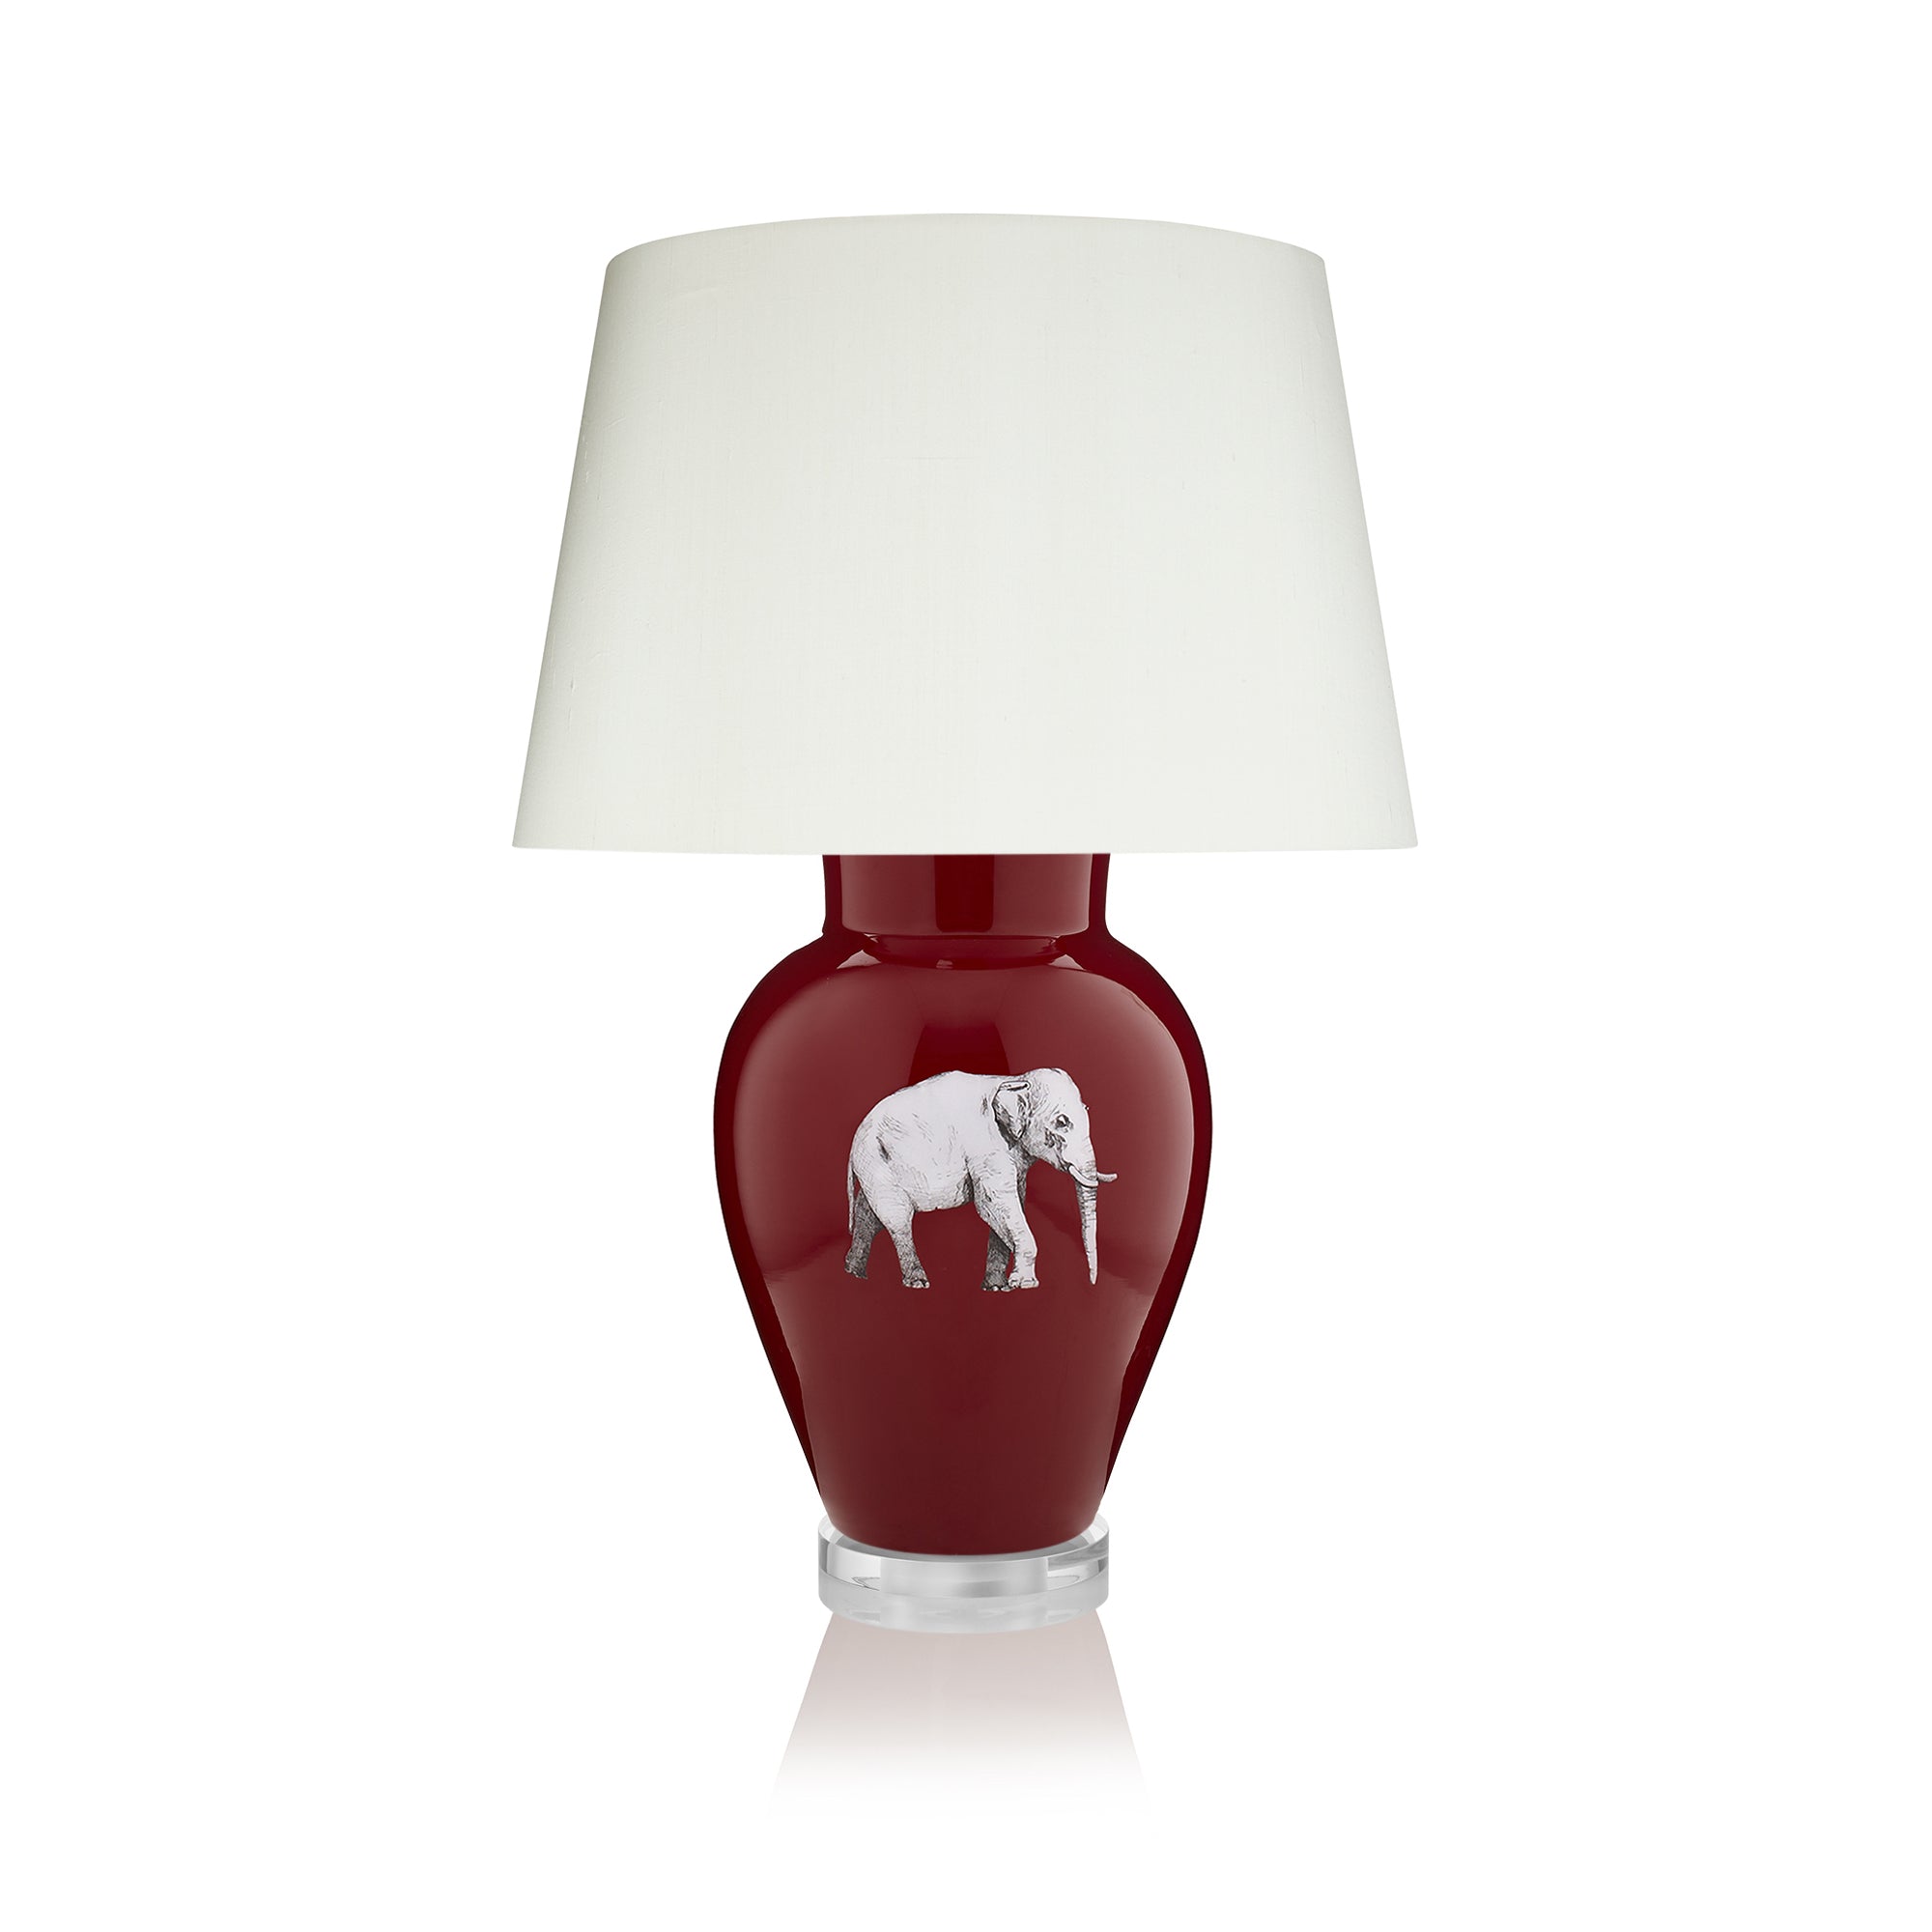 ELEPHANT IN THE ROOM LAMP BASE IN LARGE